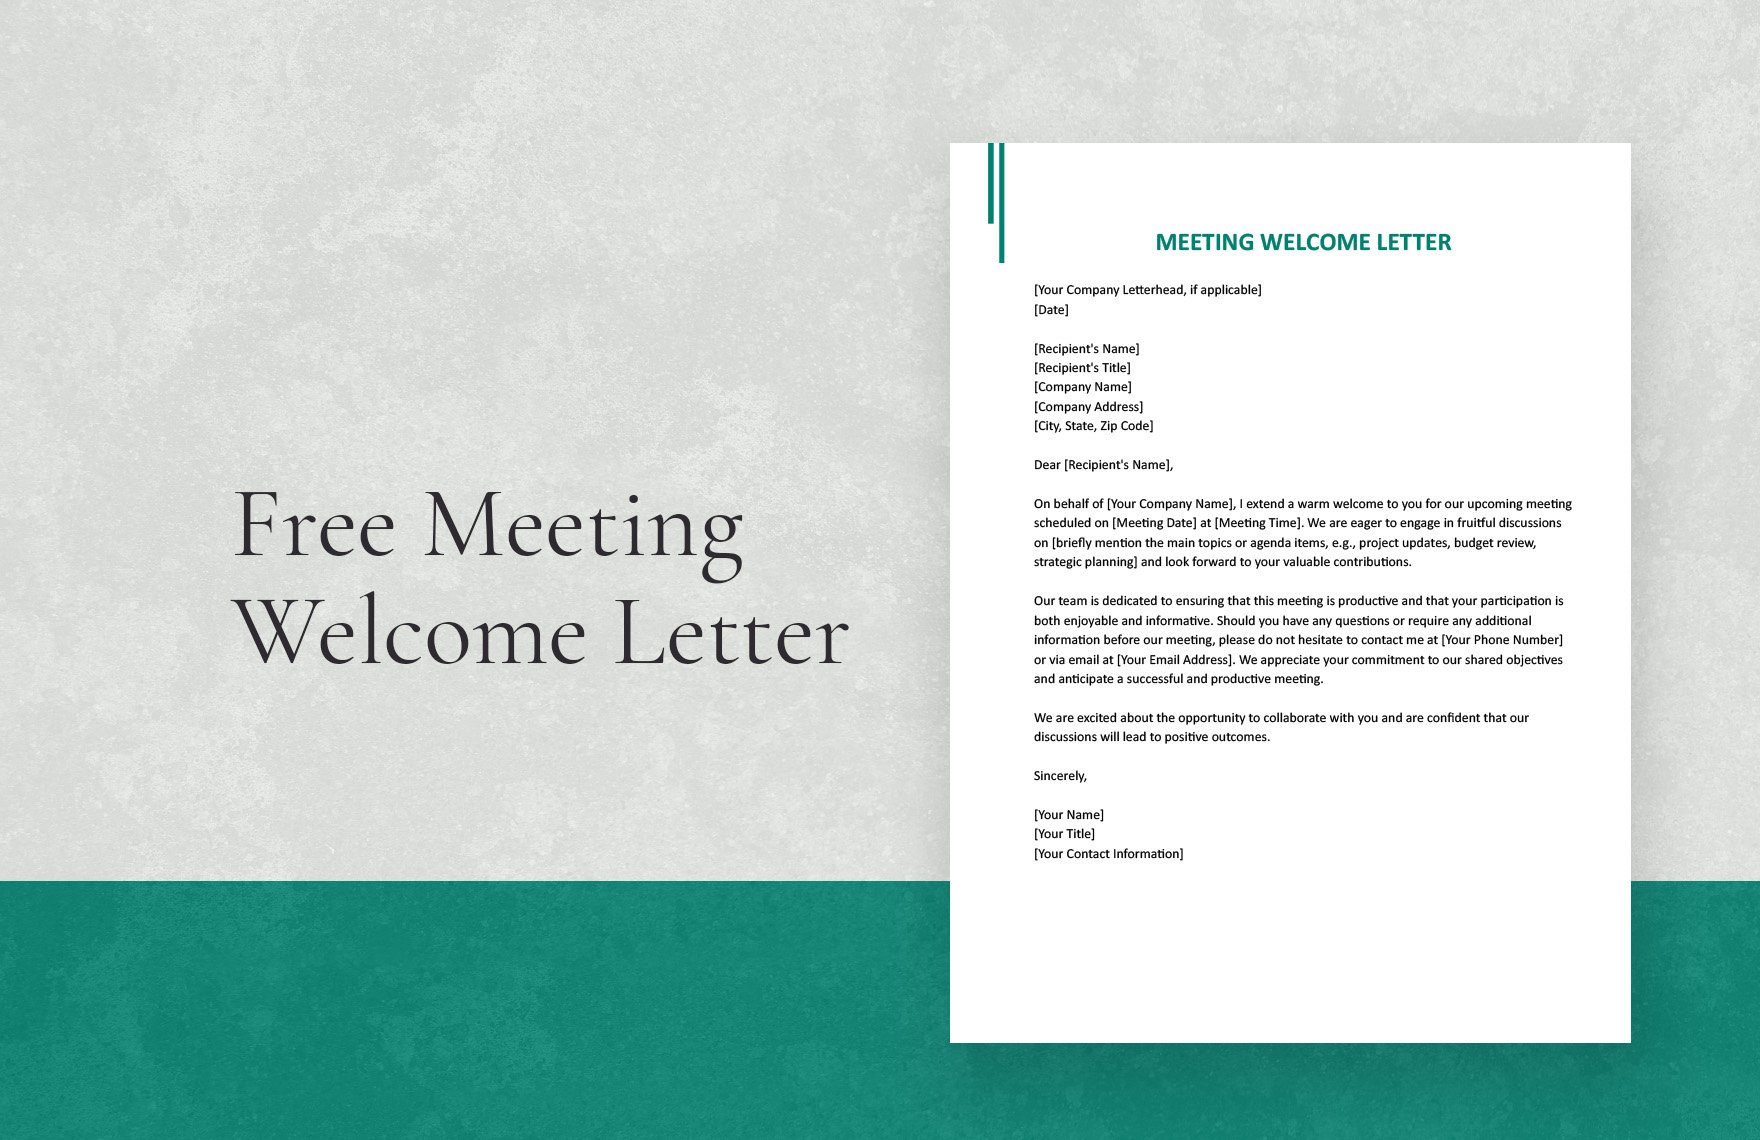 Meeting Welcome Letter